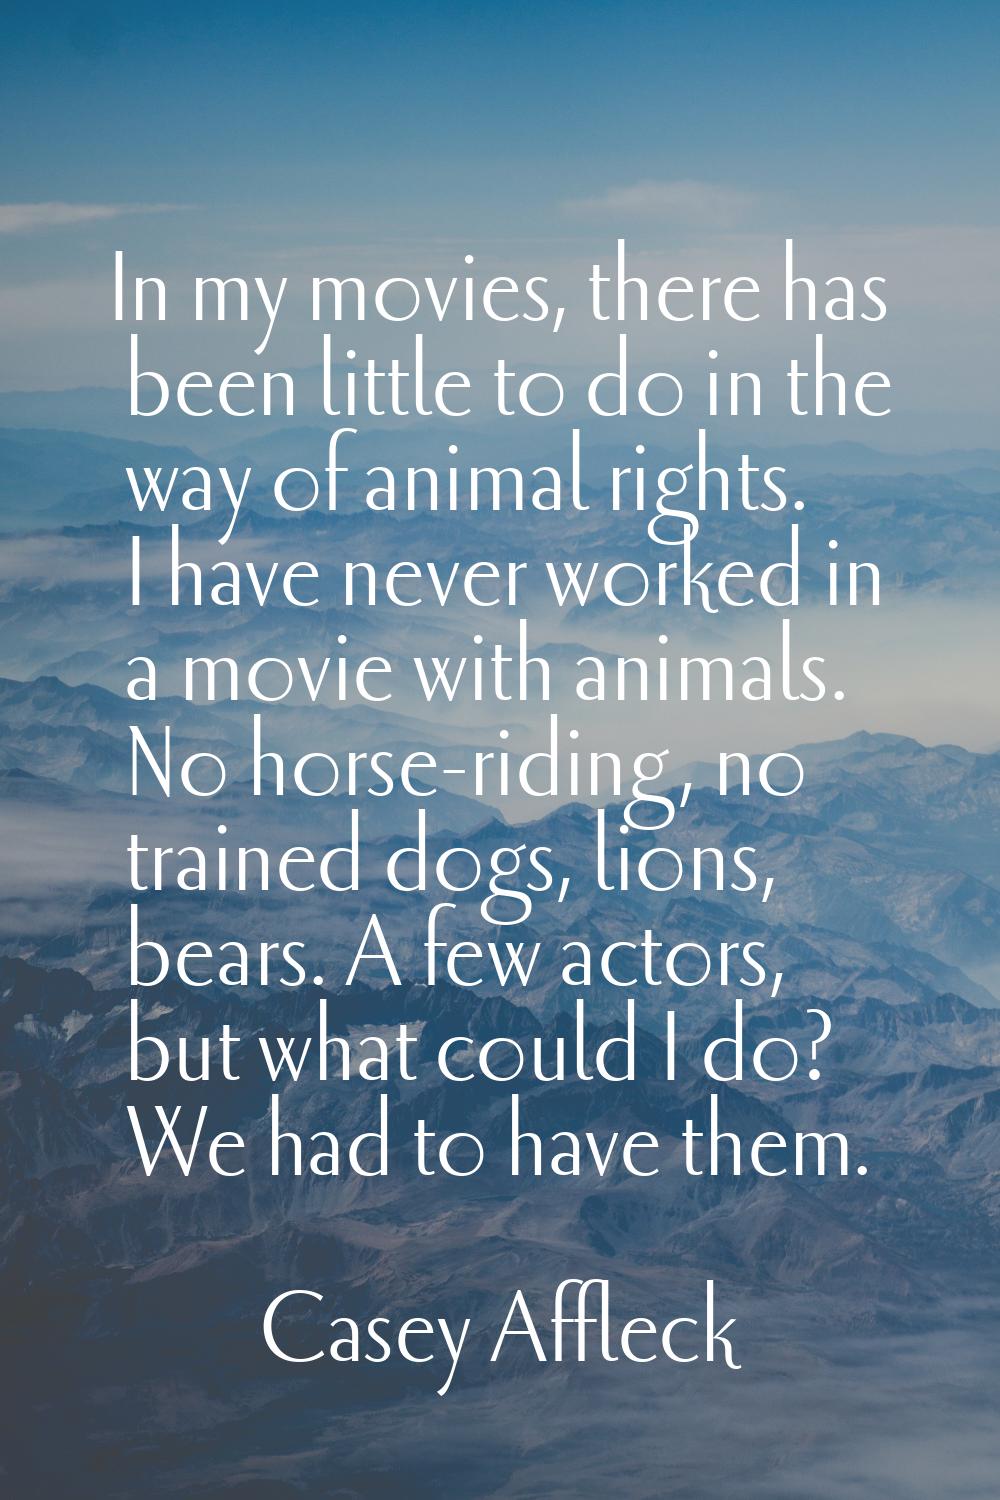 In my movies, there has been little to do in the way of animal rights. I have never worked in a mov